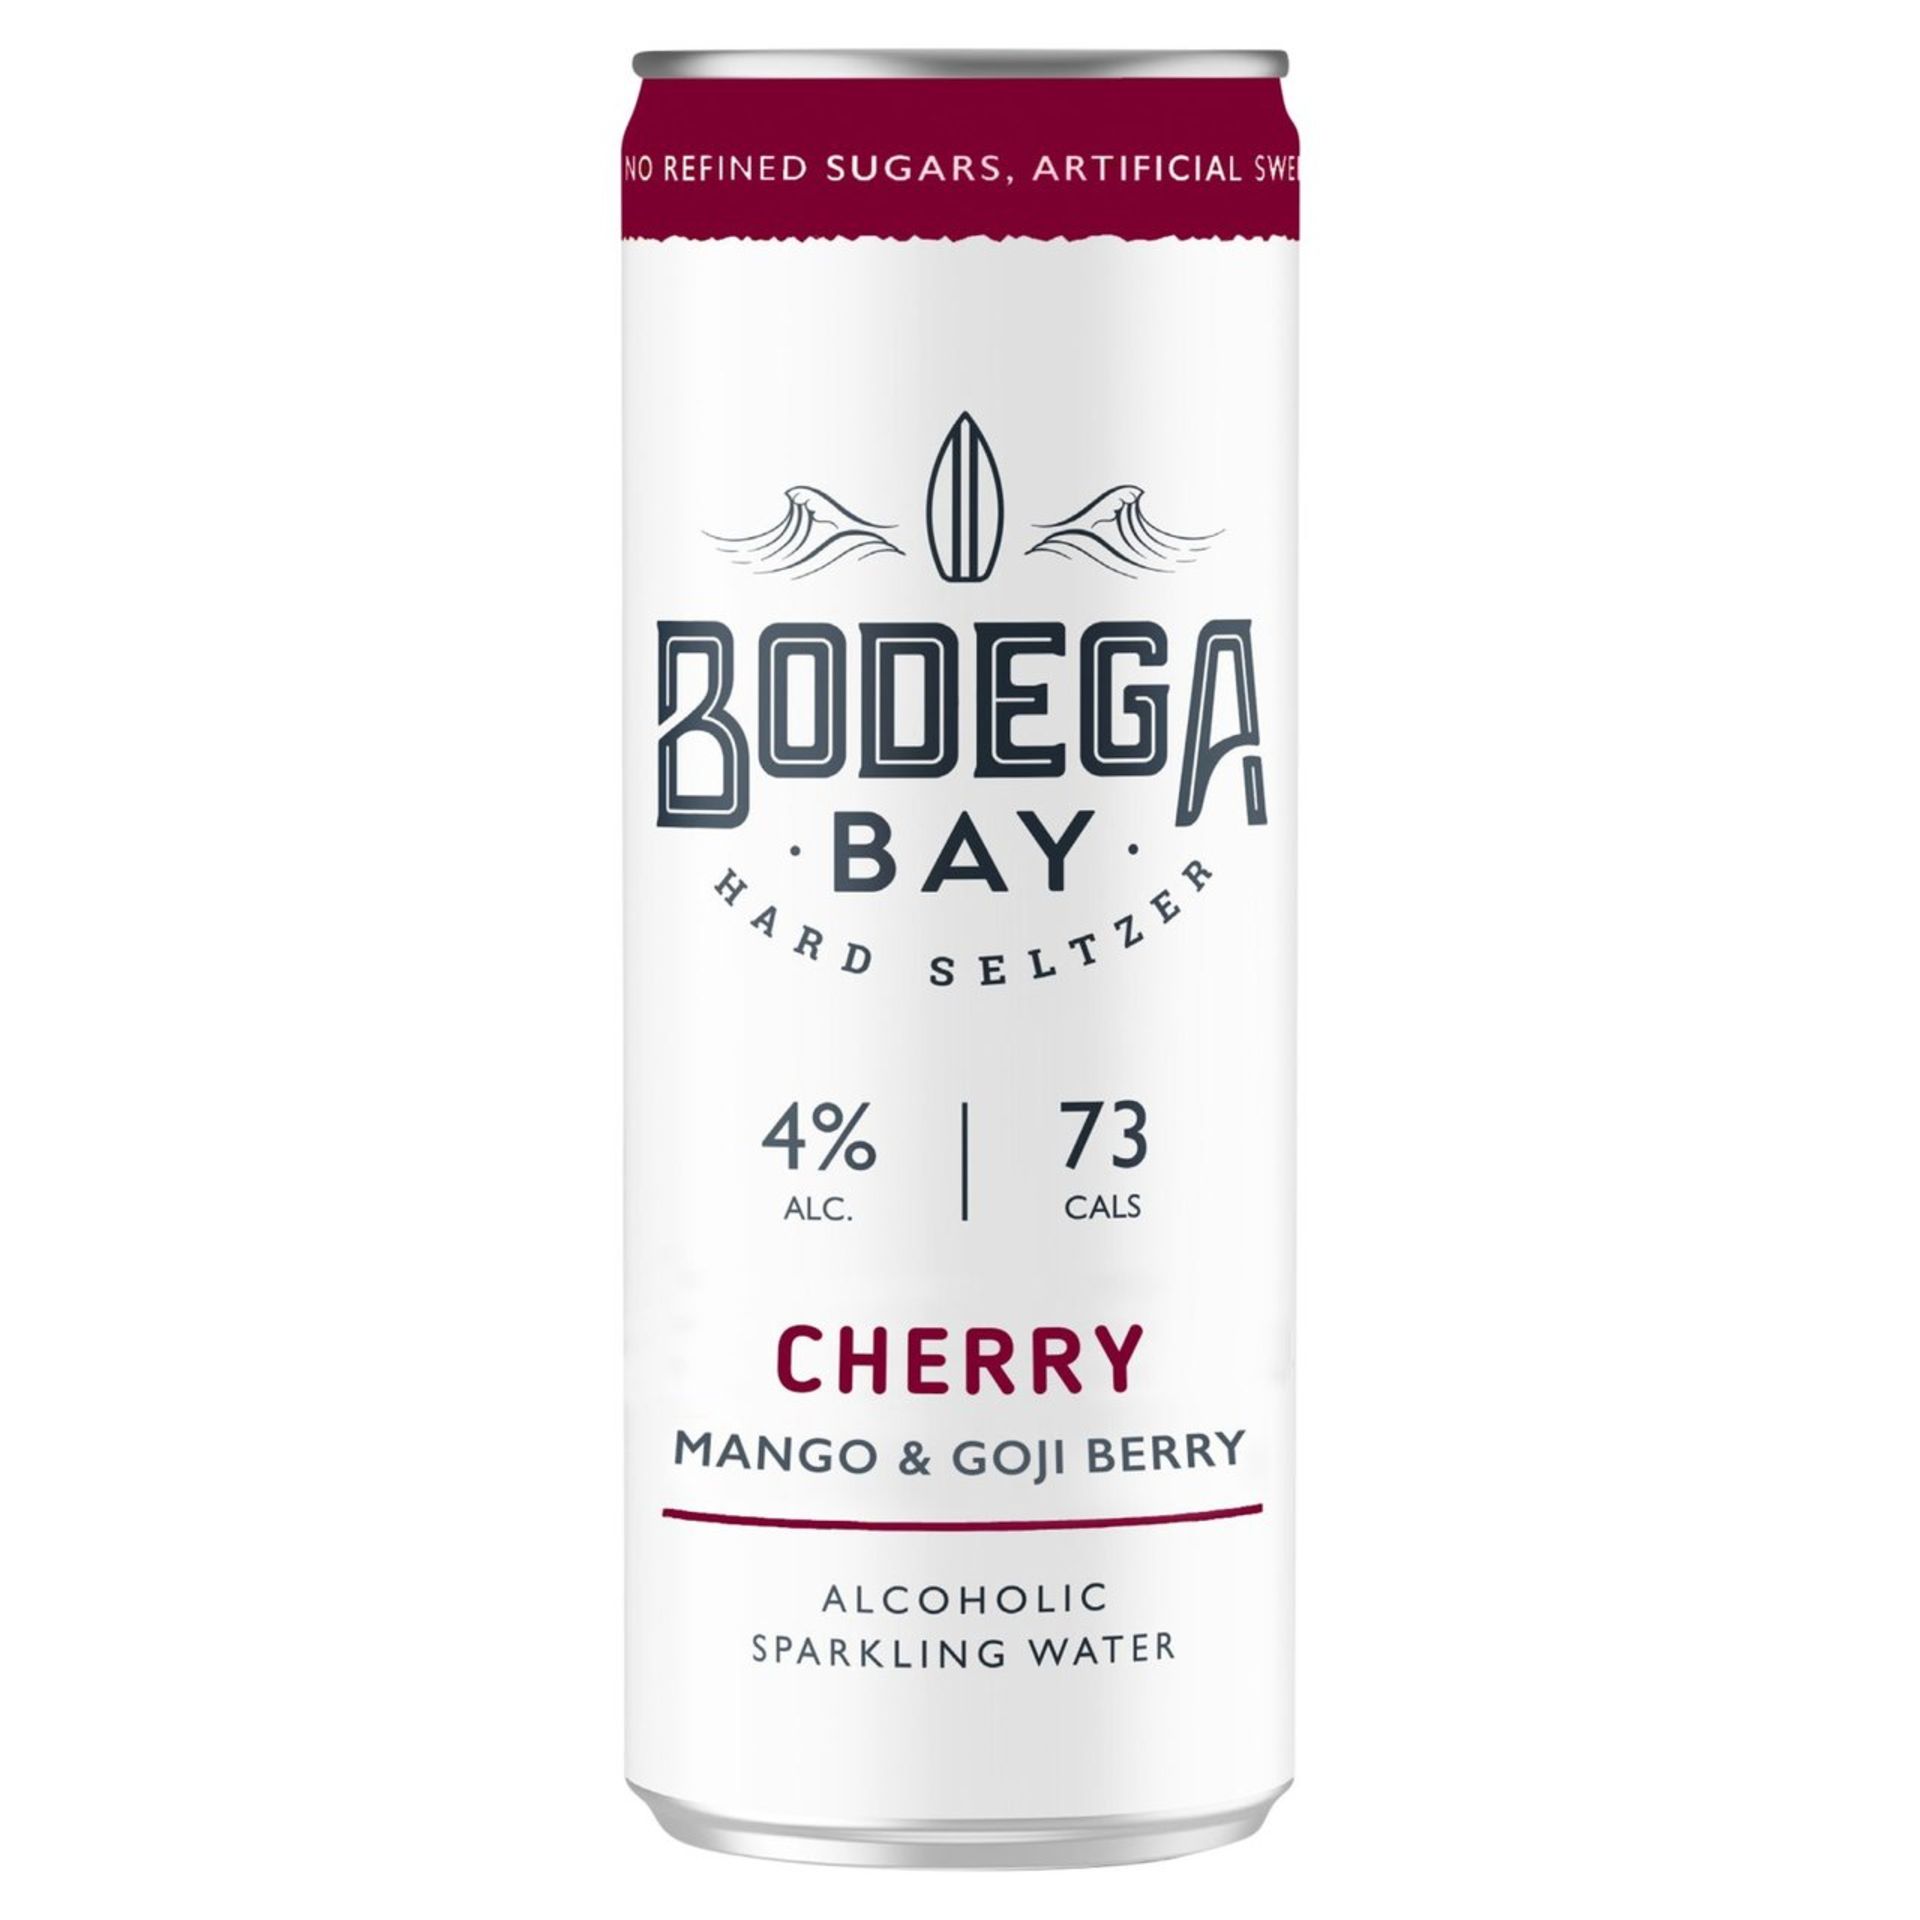 1,080 x Cans of Bodega Bay Hard Seltzer 250ml Alcoholic Sparkling Water Drinks - RESALE JOB LOT - Image 22 of 30